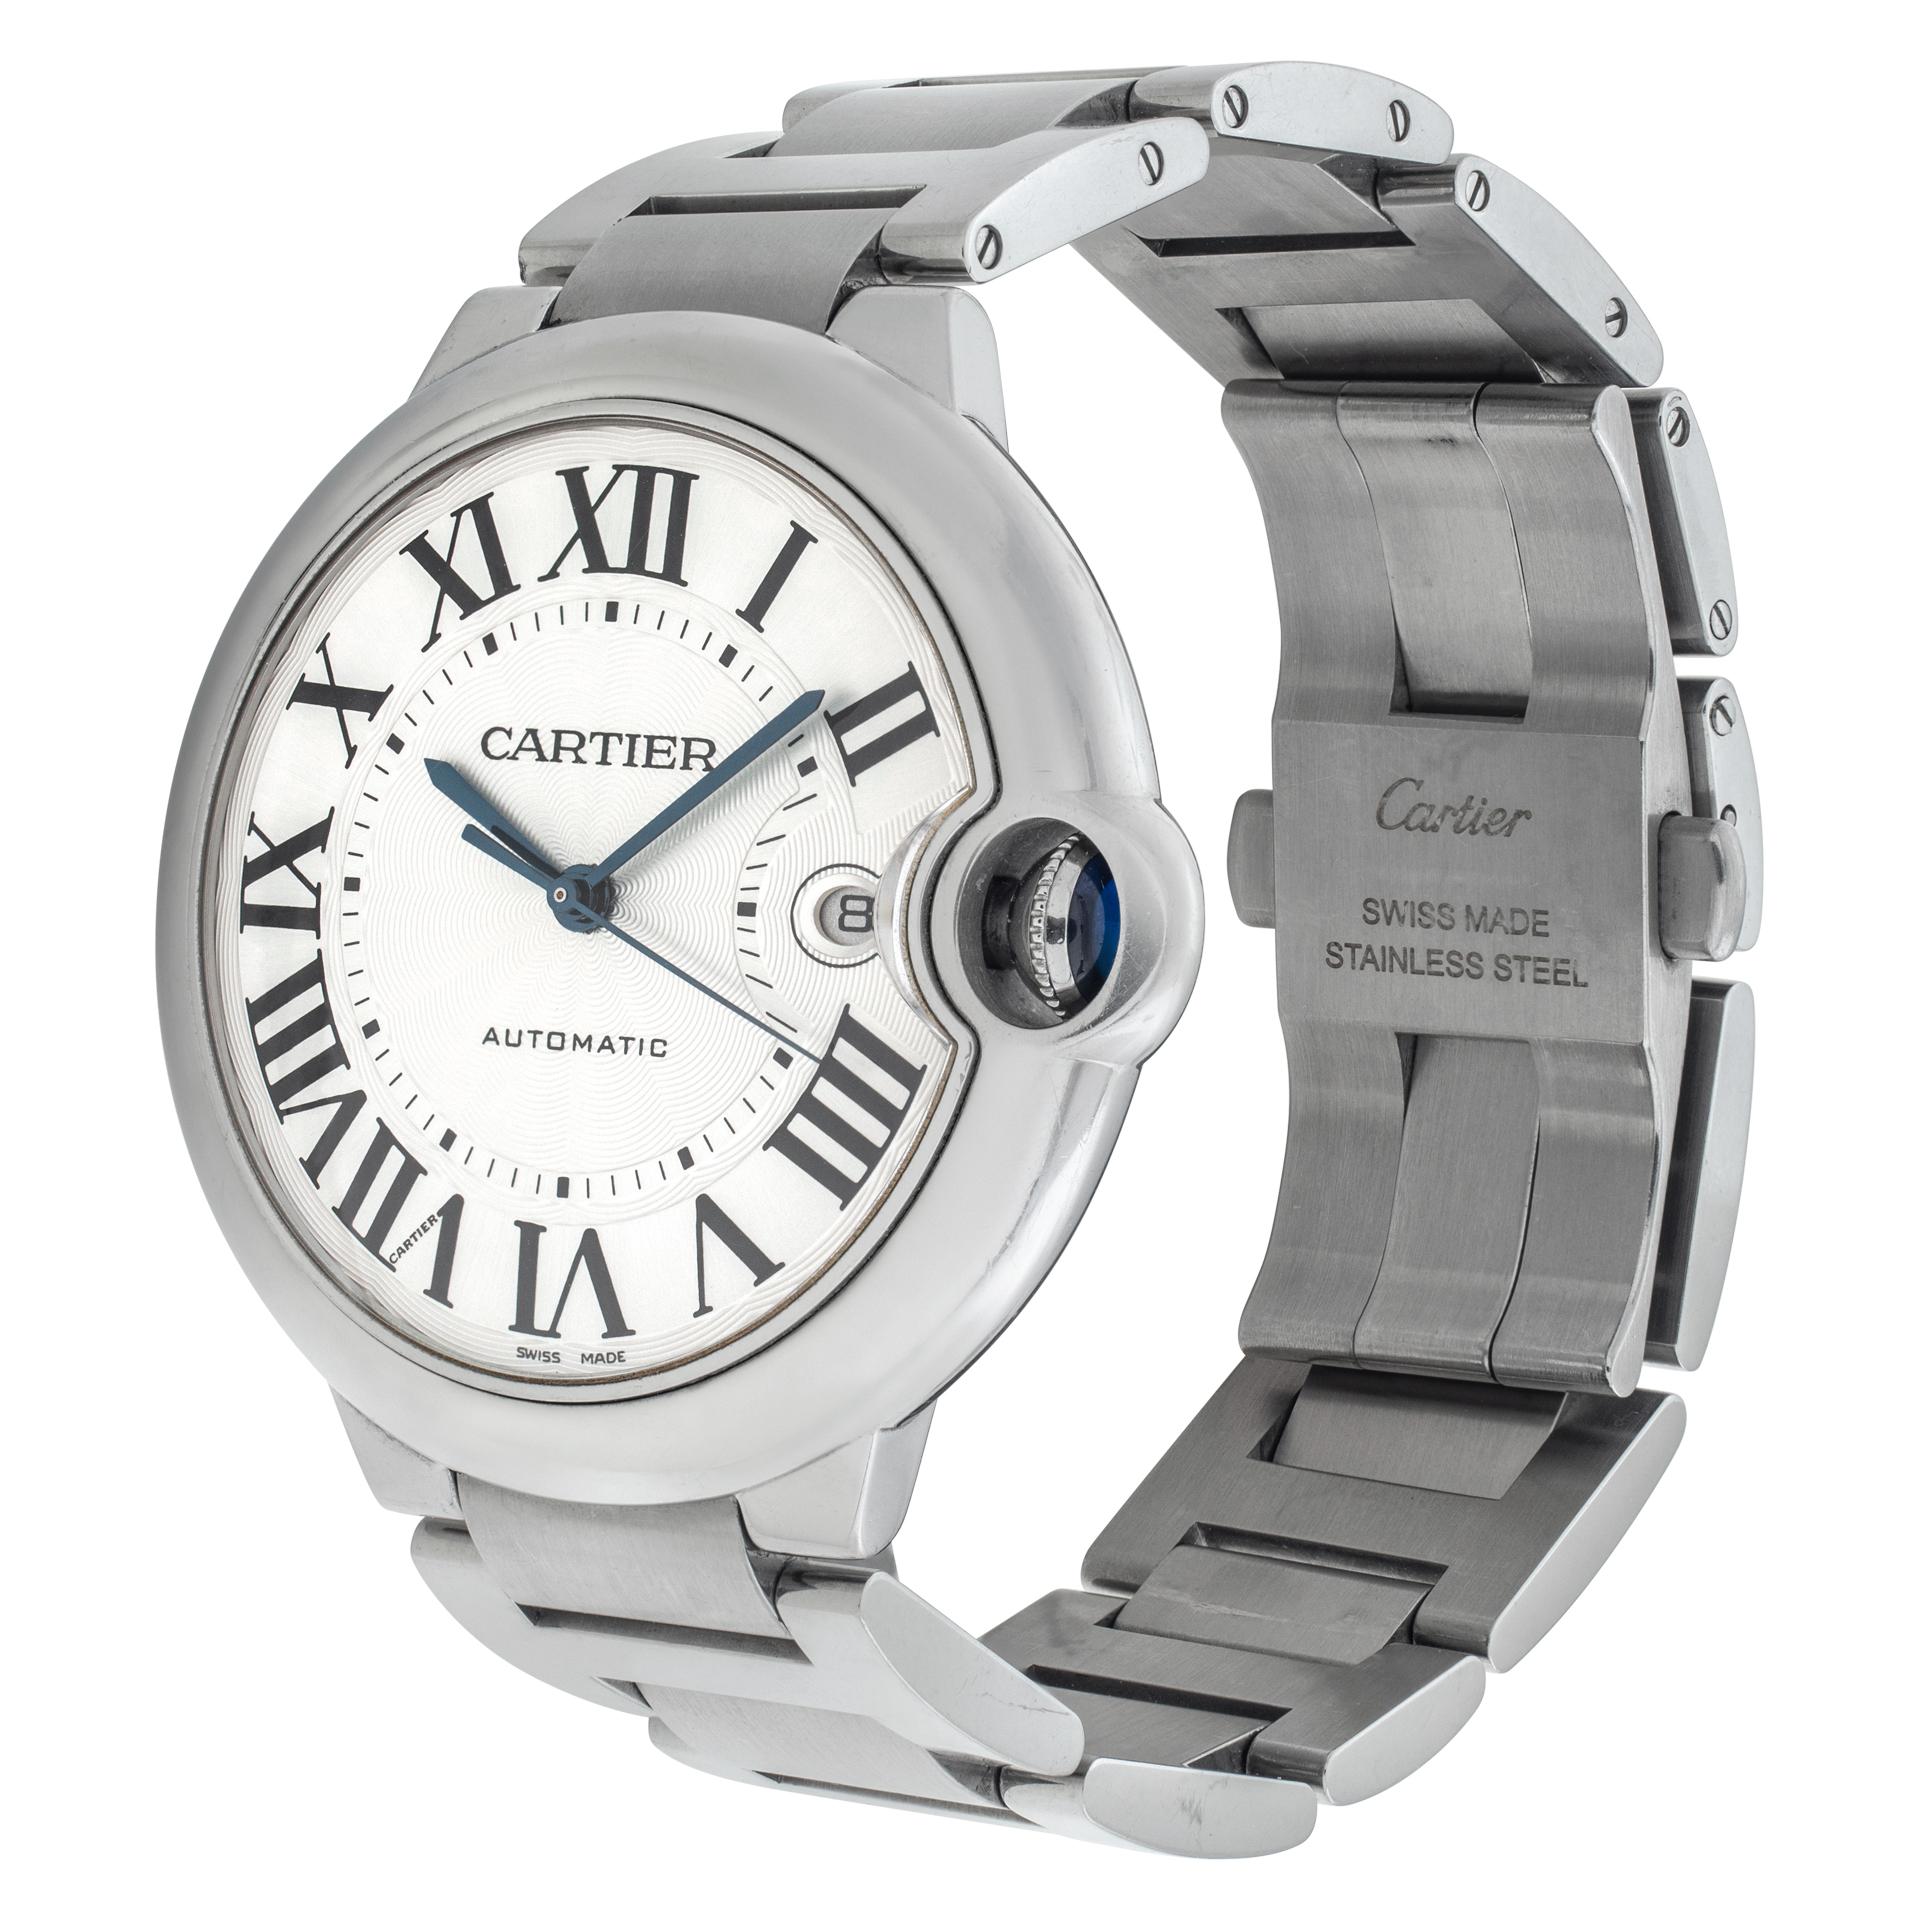 Cartier Ballon Bleu in stainless steel. Automatic with date and sweep seconds. 42 mm case size. Ref W69012Z4. Fine Pre-owned Cartier Watch. Certified preowned Classic Cartier Ballon Bleu W69012Z4 watch is made out of Stainless steel on a Stainless